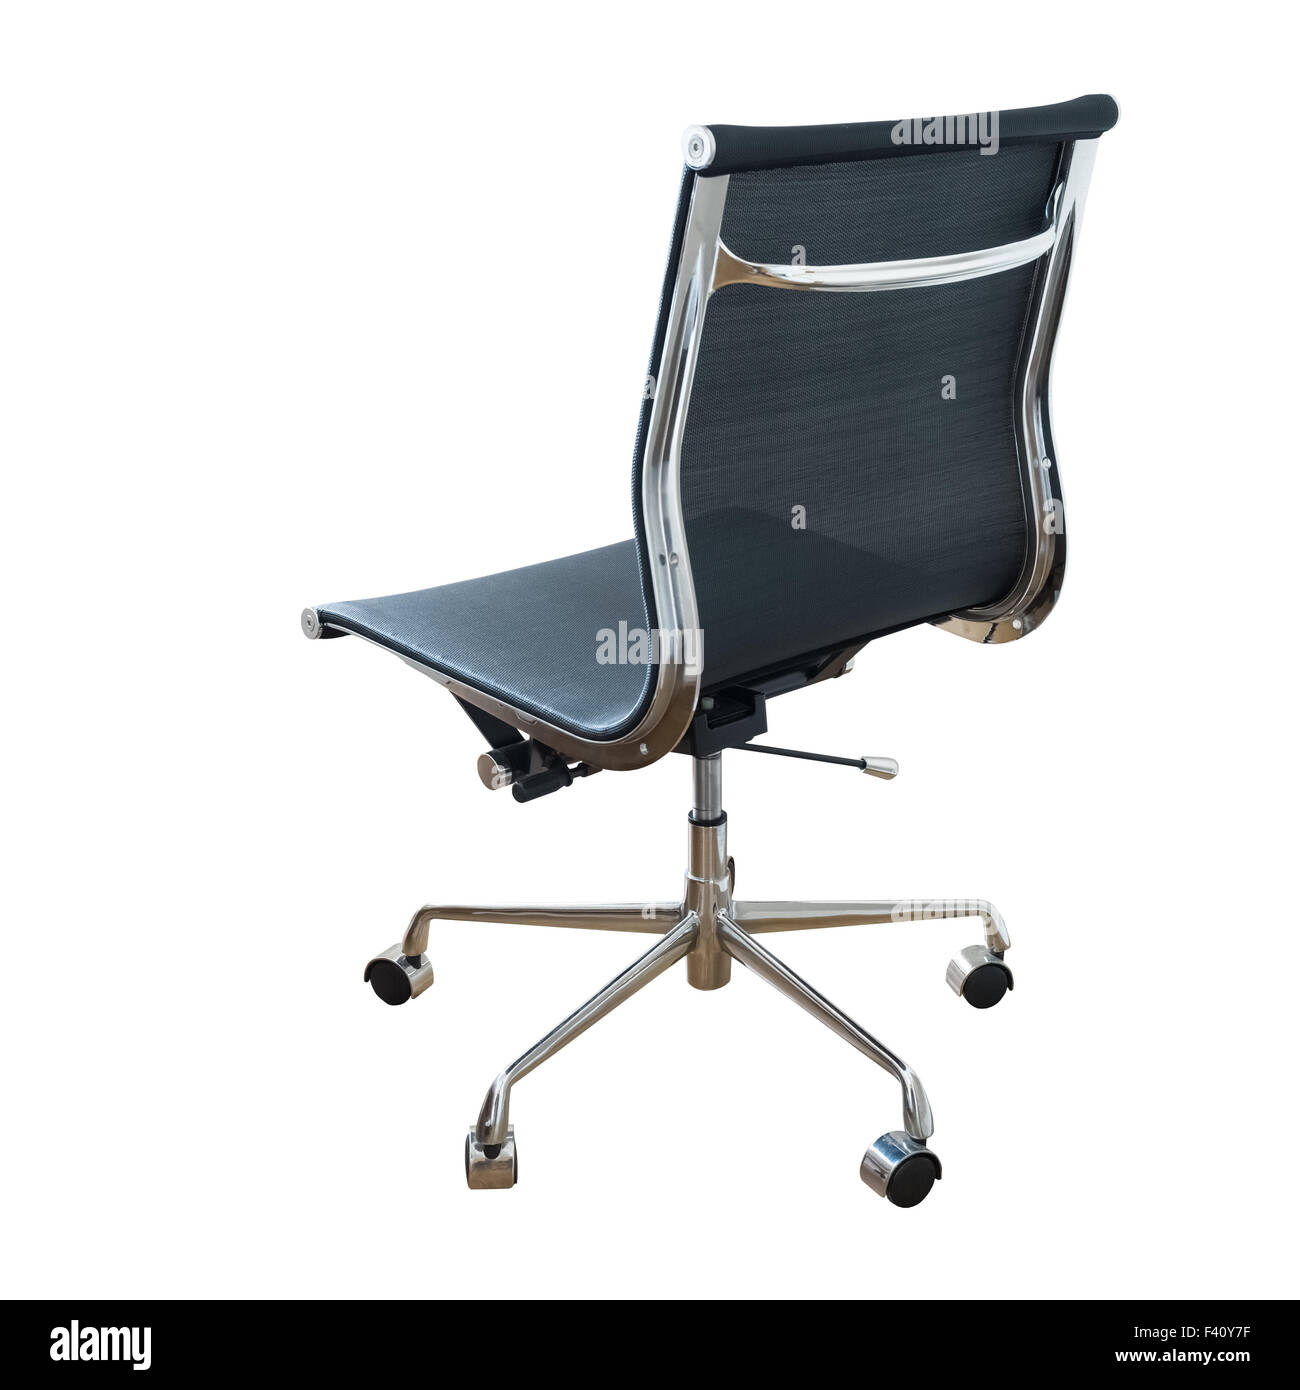 swivel chair isolated Stock Photo